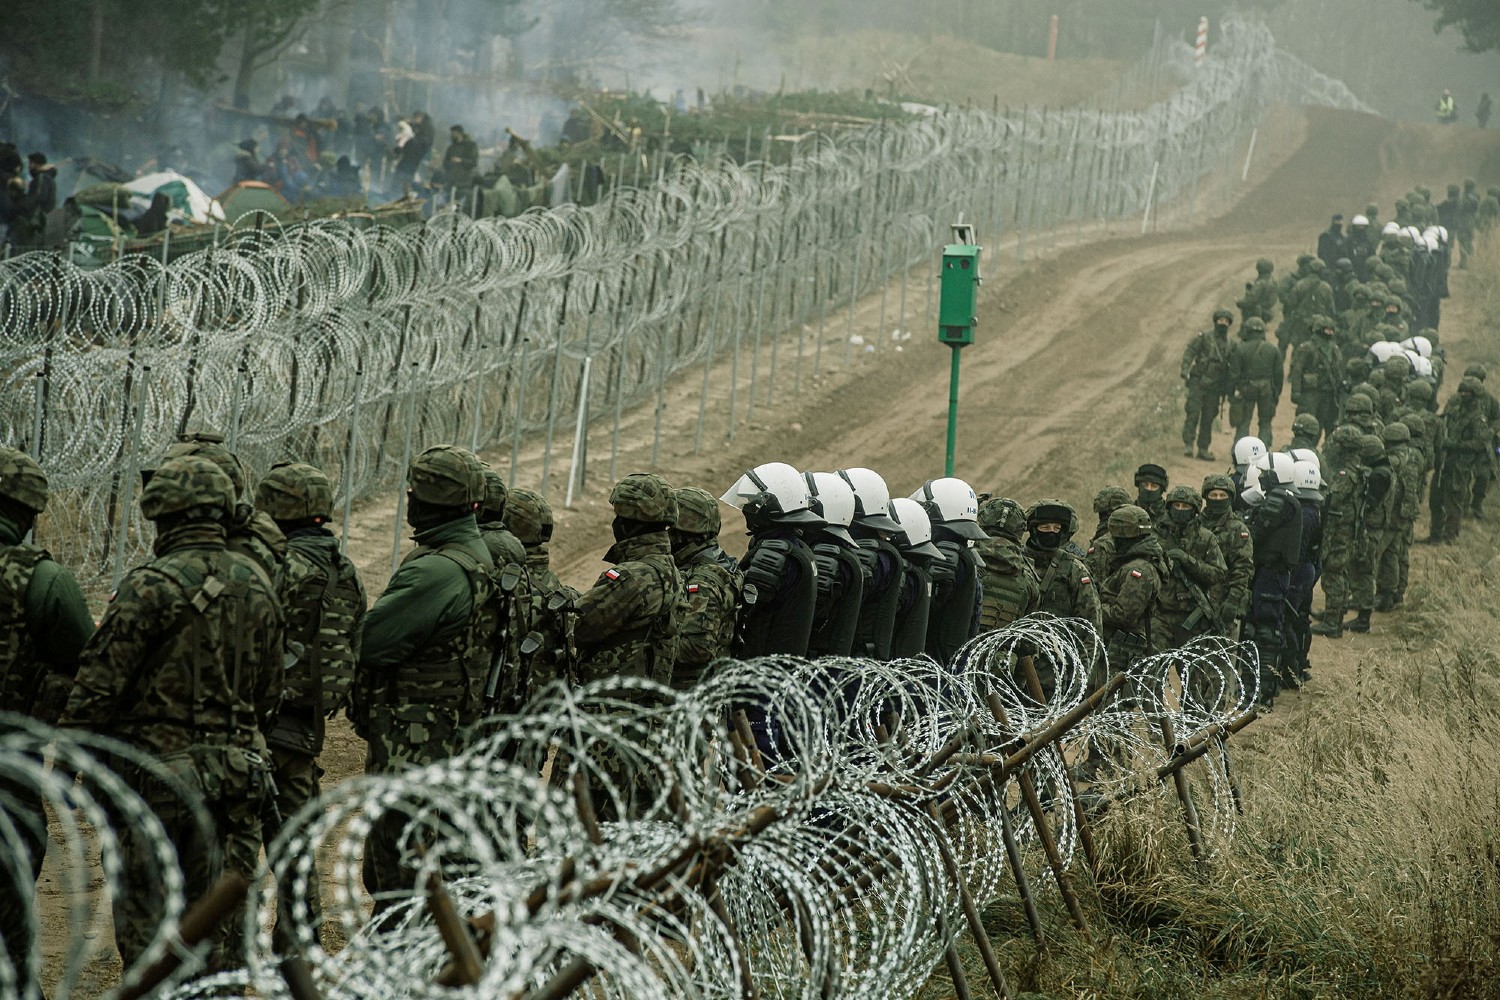 Polish soldiers and police watch migrants at the Poland/Belarus border near Kuznica, Poland, in this photograph released by the Territorial Defence Forces, November 12, 2021. Irek Dorozanski/DWOT/Handout via Reuters